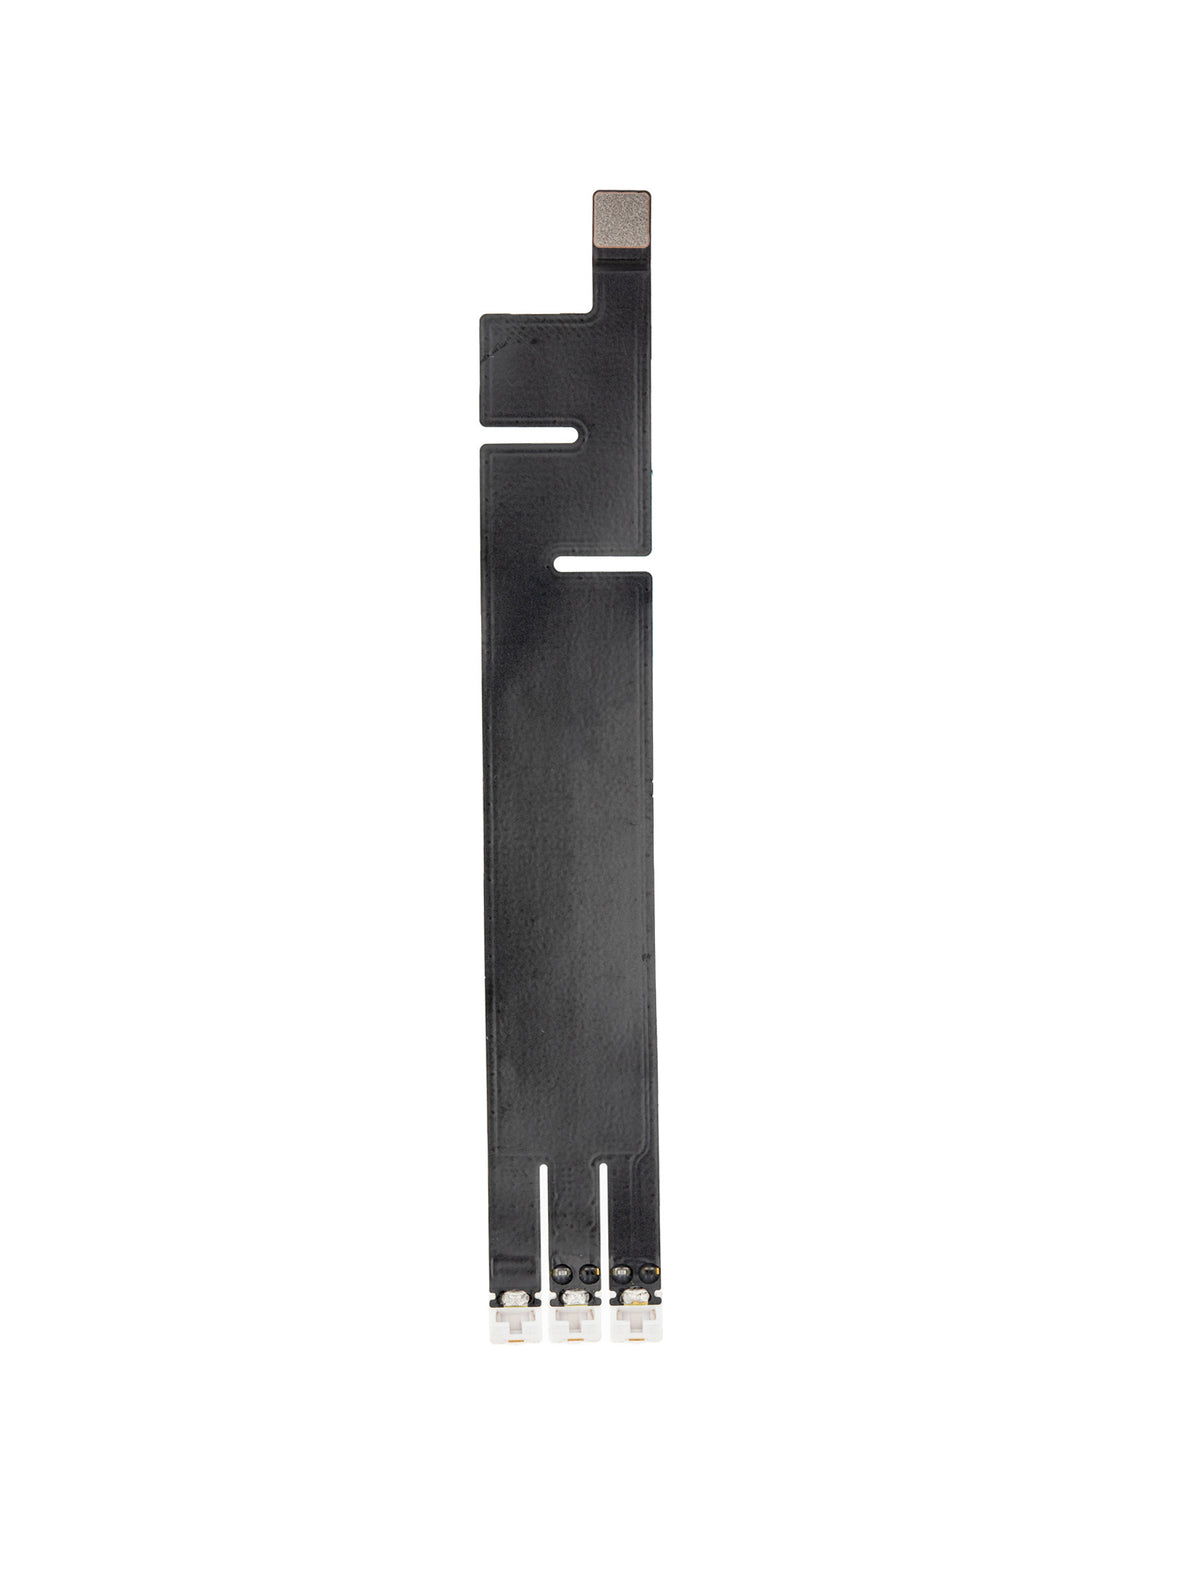 KEYBOARD FLEX CABLE (WHITE) COMPATIBLE WITH IPAD AIR 3